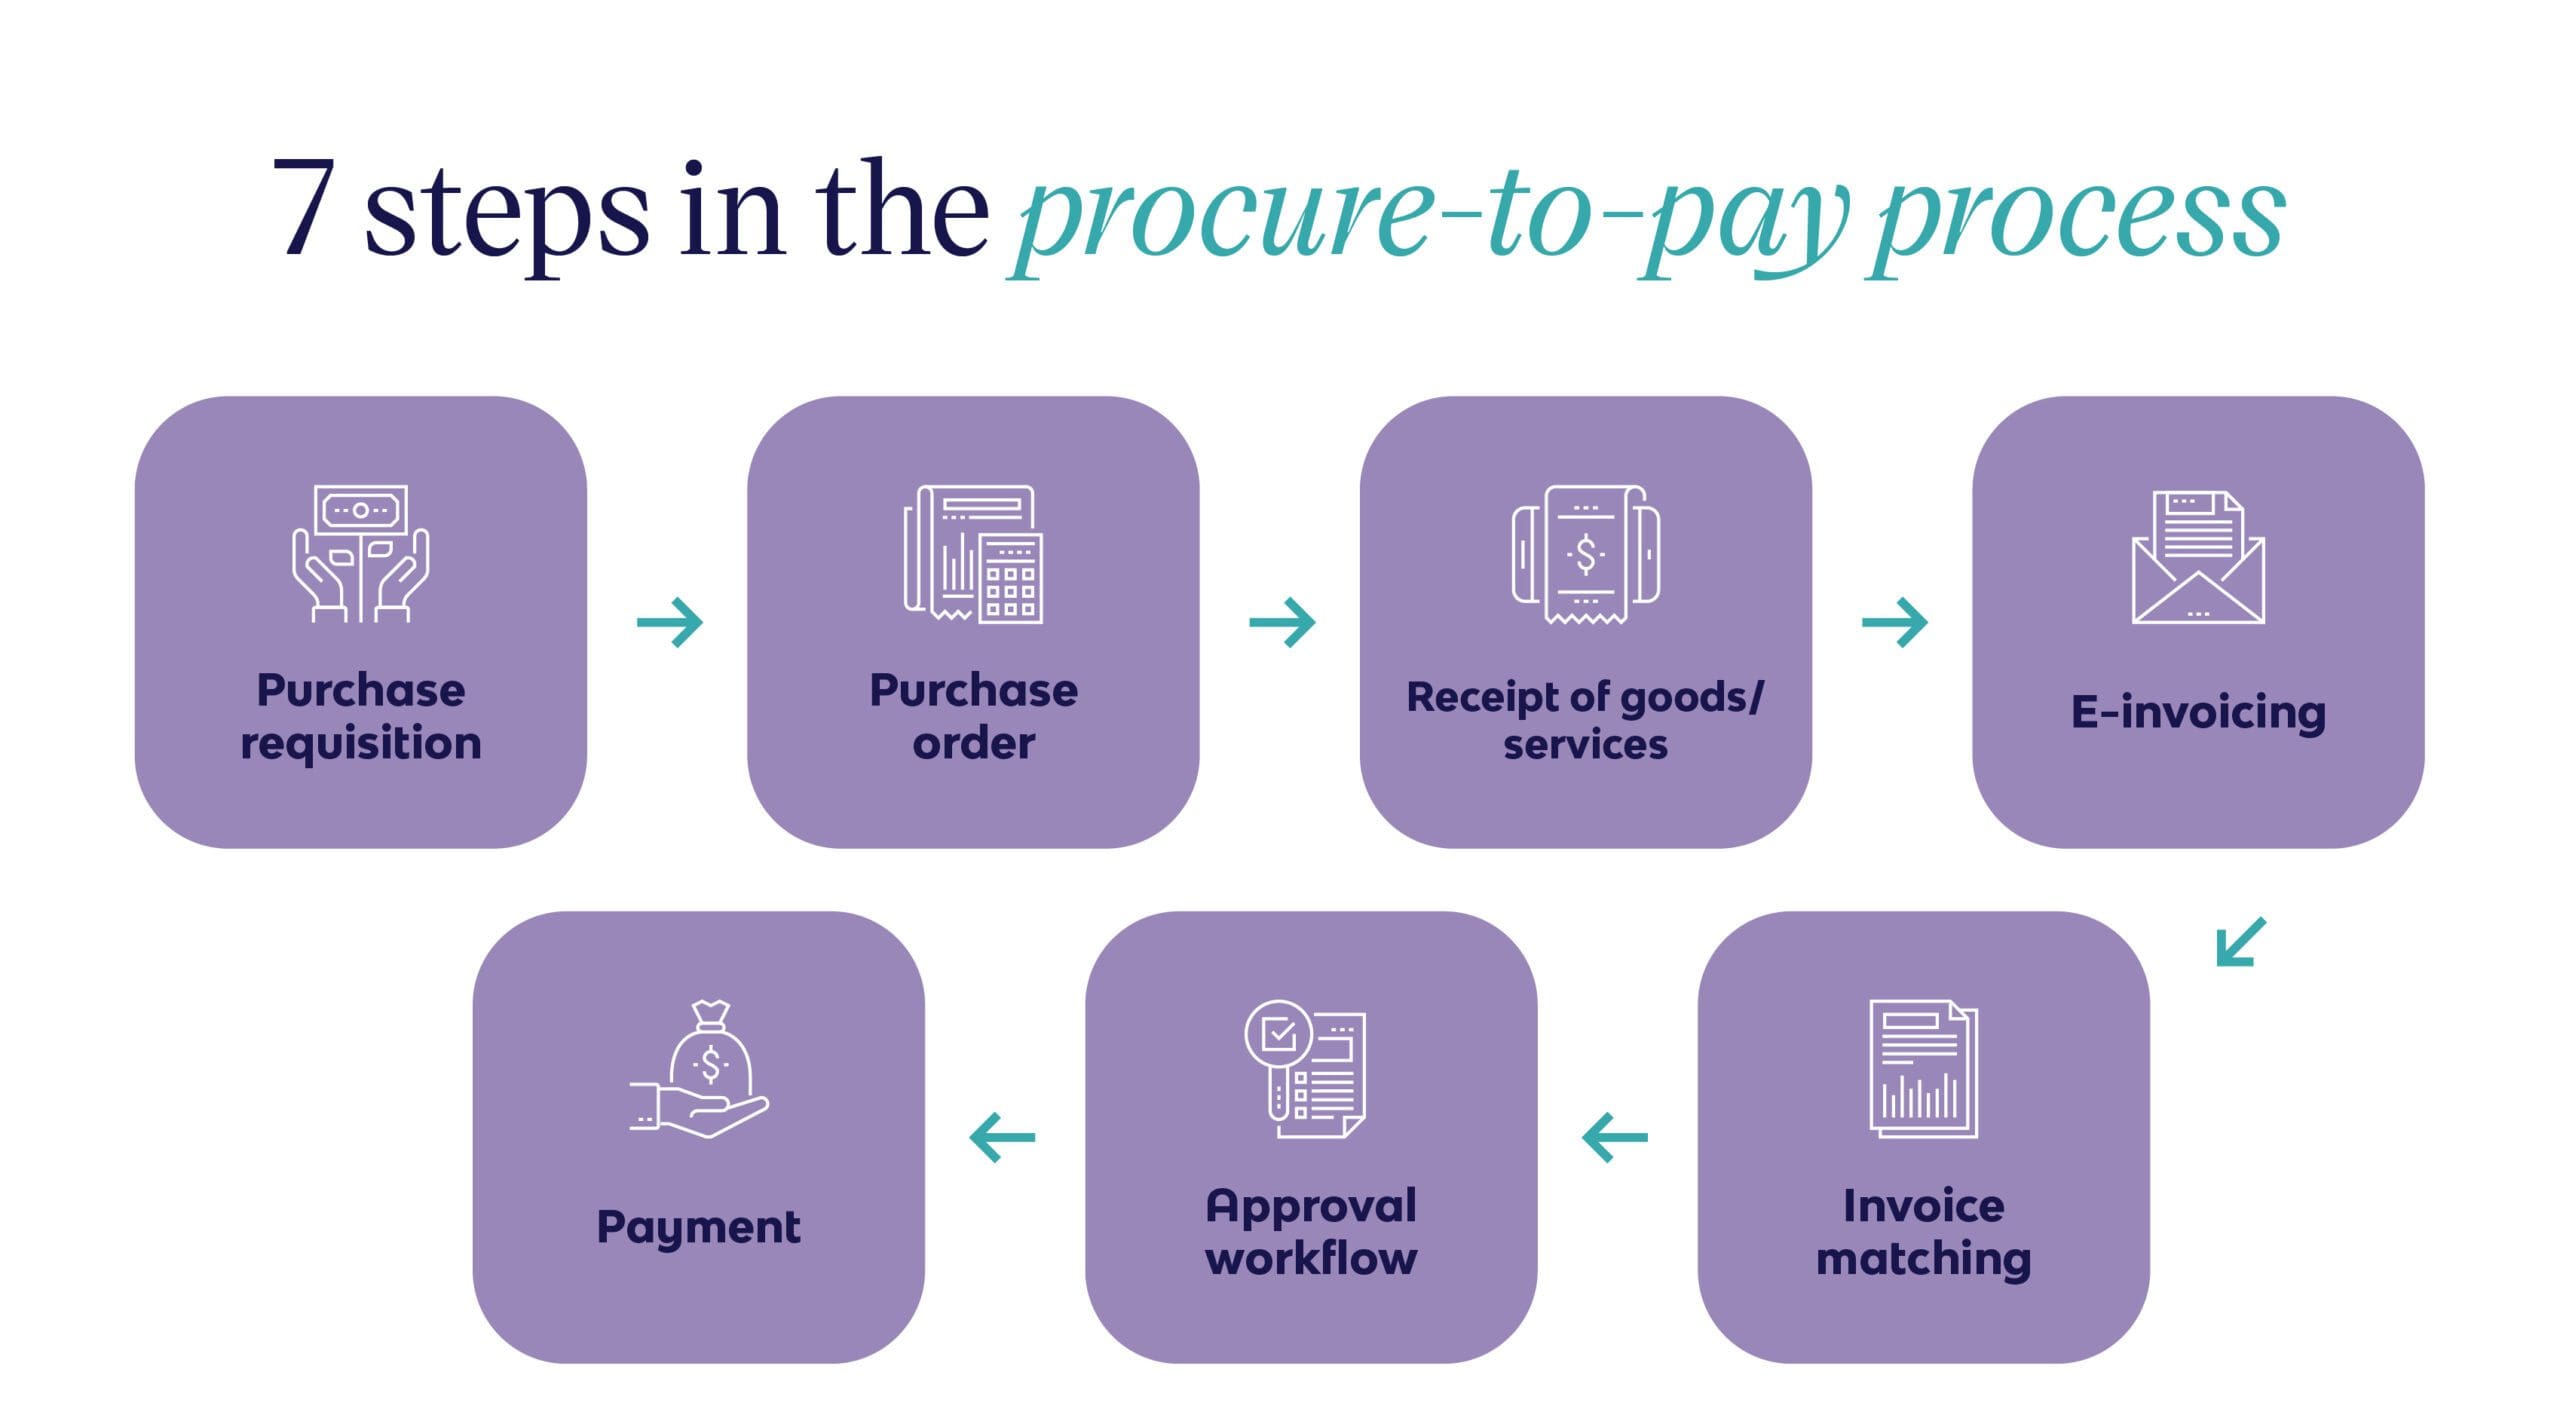 Seven steps in the procure-to-pay process, from purchase requisition and receipt of goods to payments.